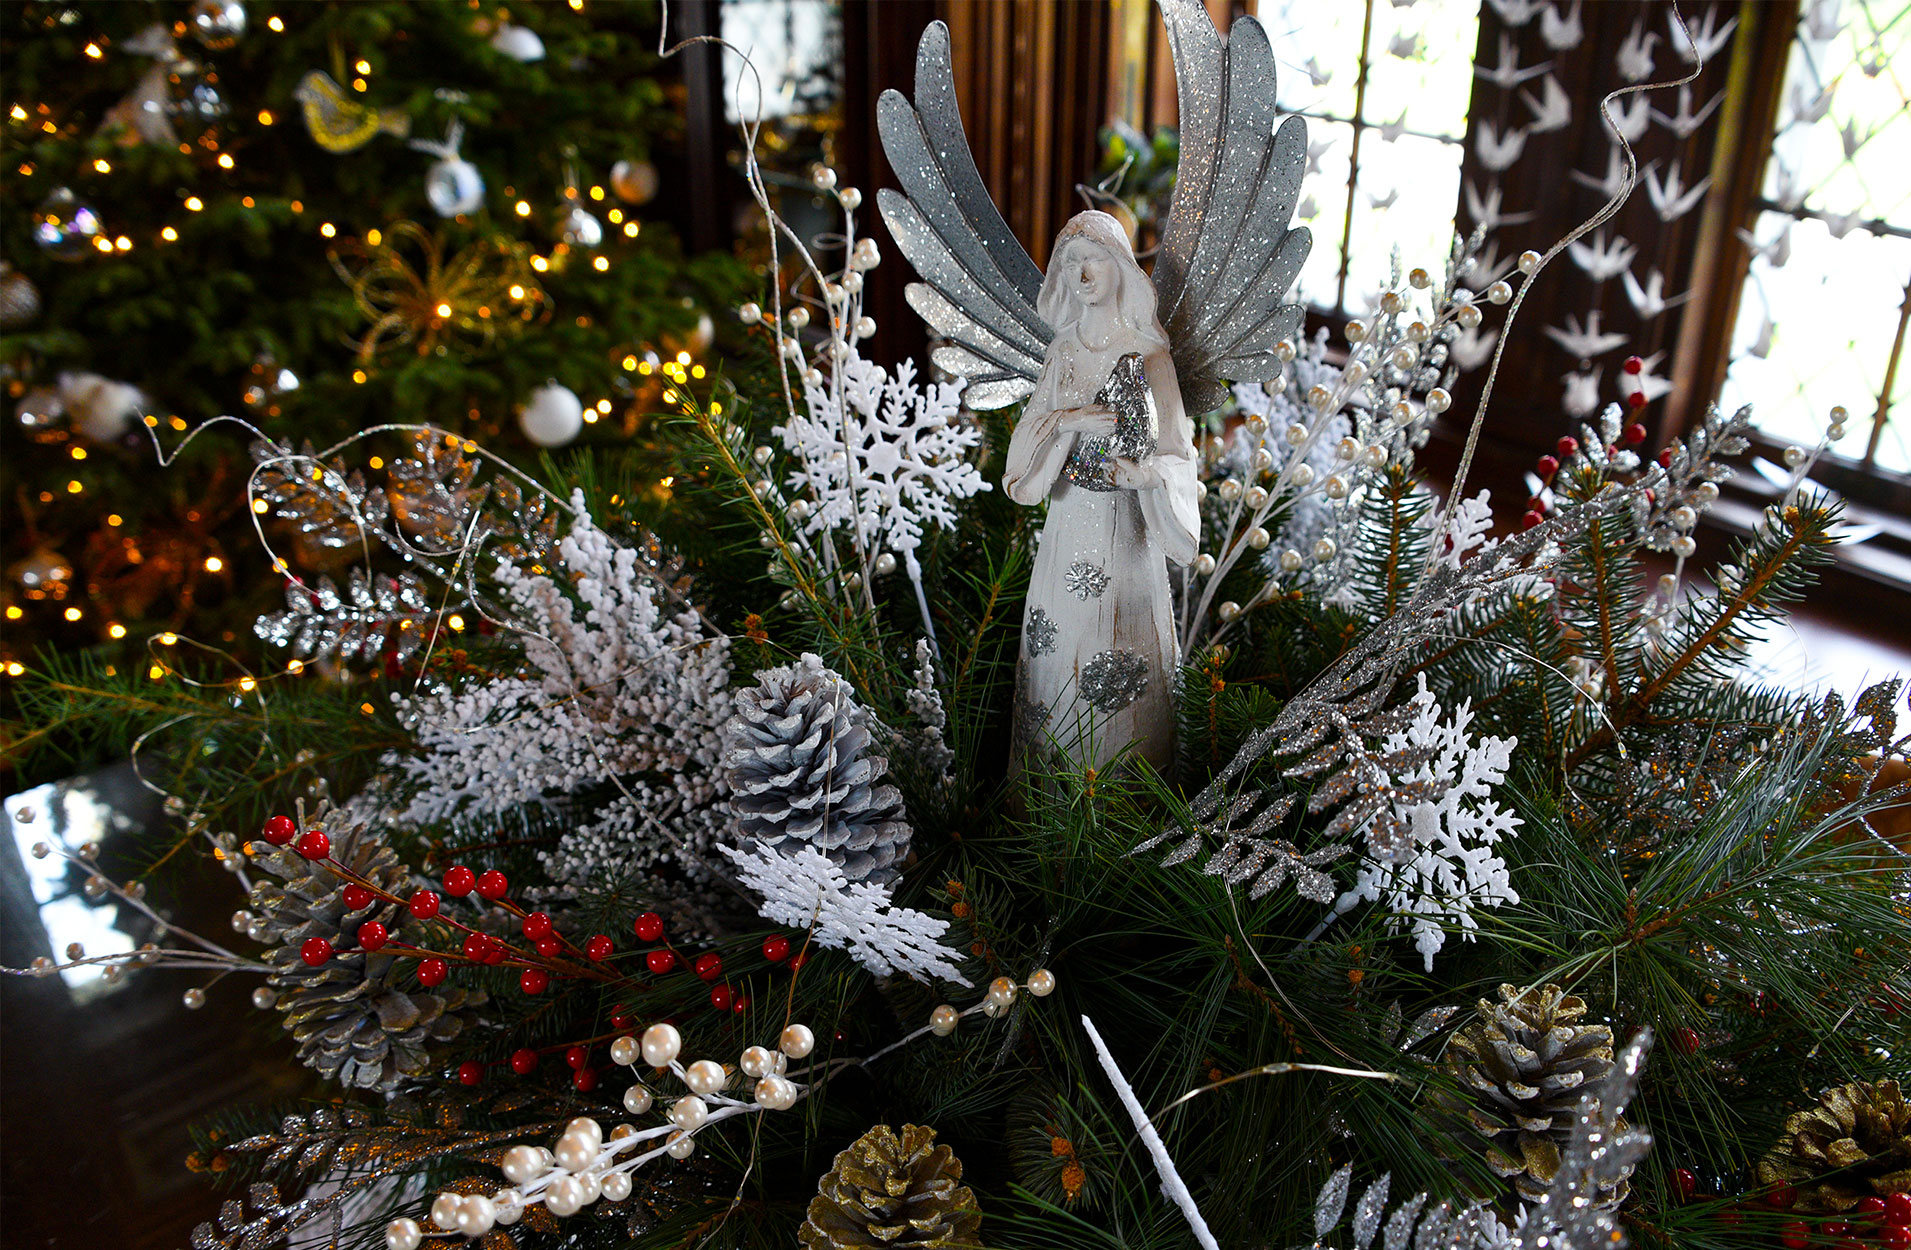 A display on the desk in the Library, an angel atop a spray of greenery, conifers and berries. A Christmas tree in the background.